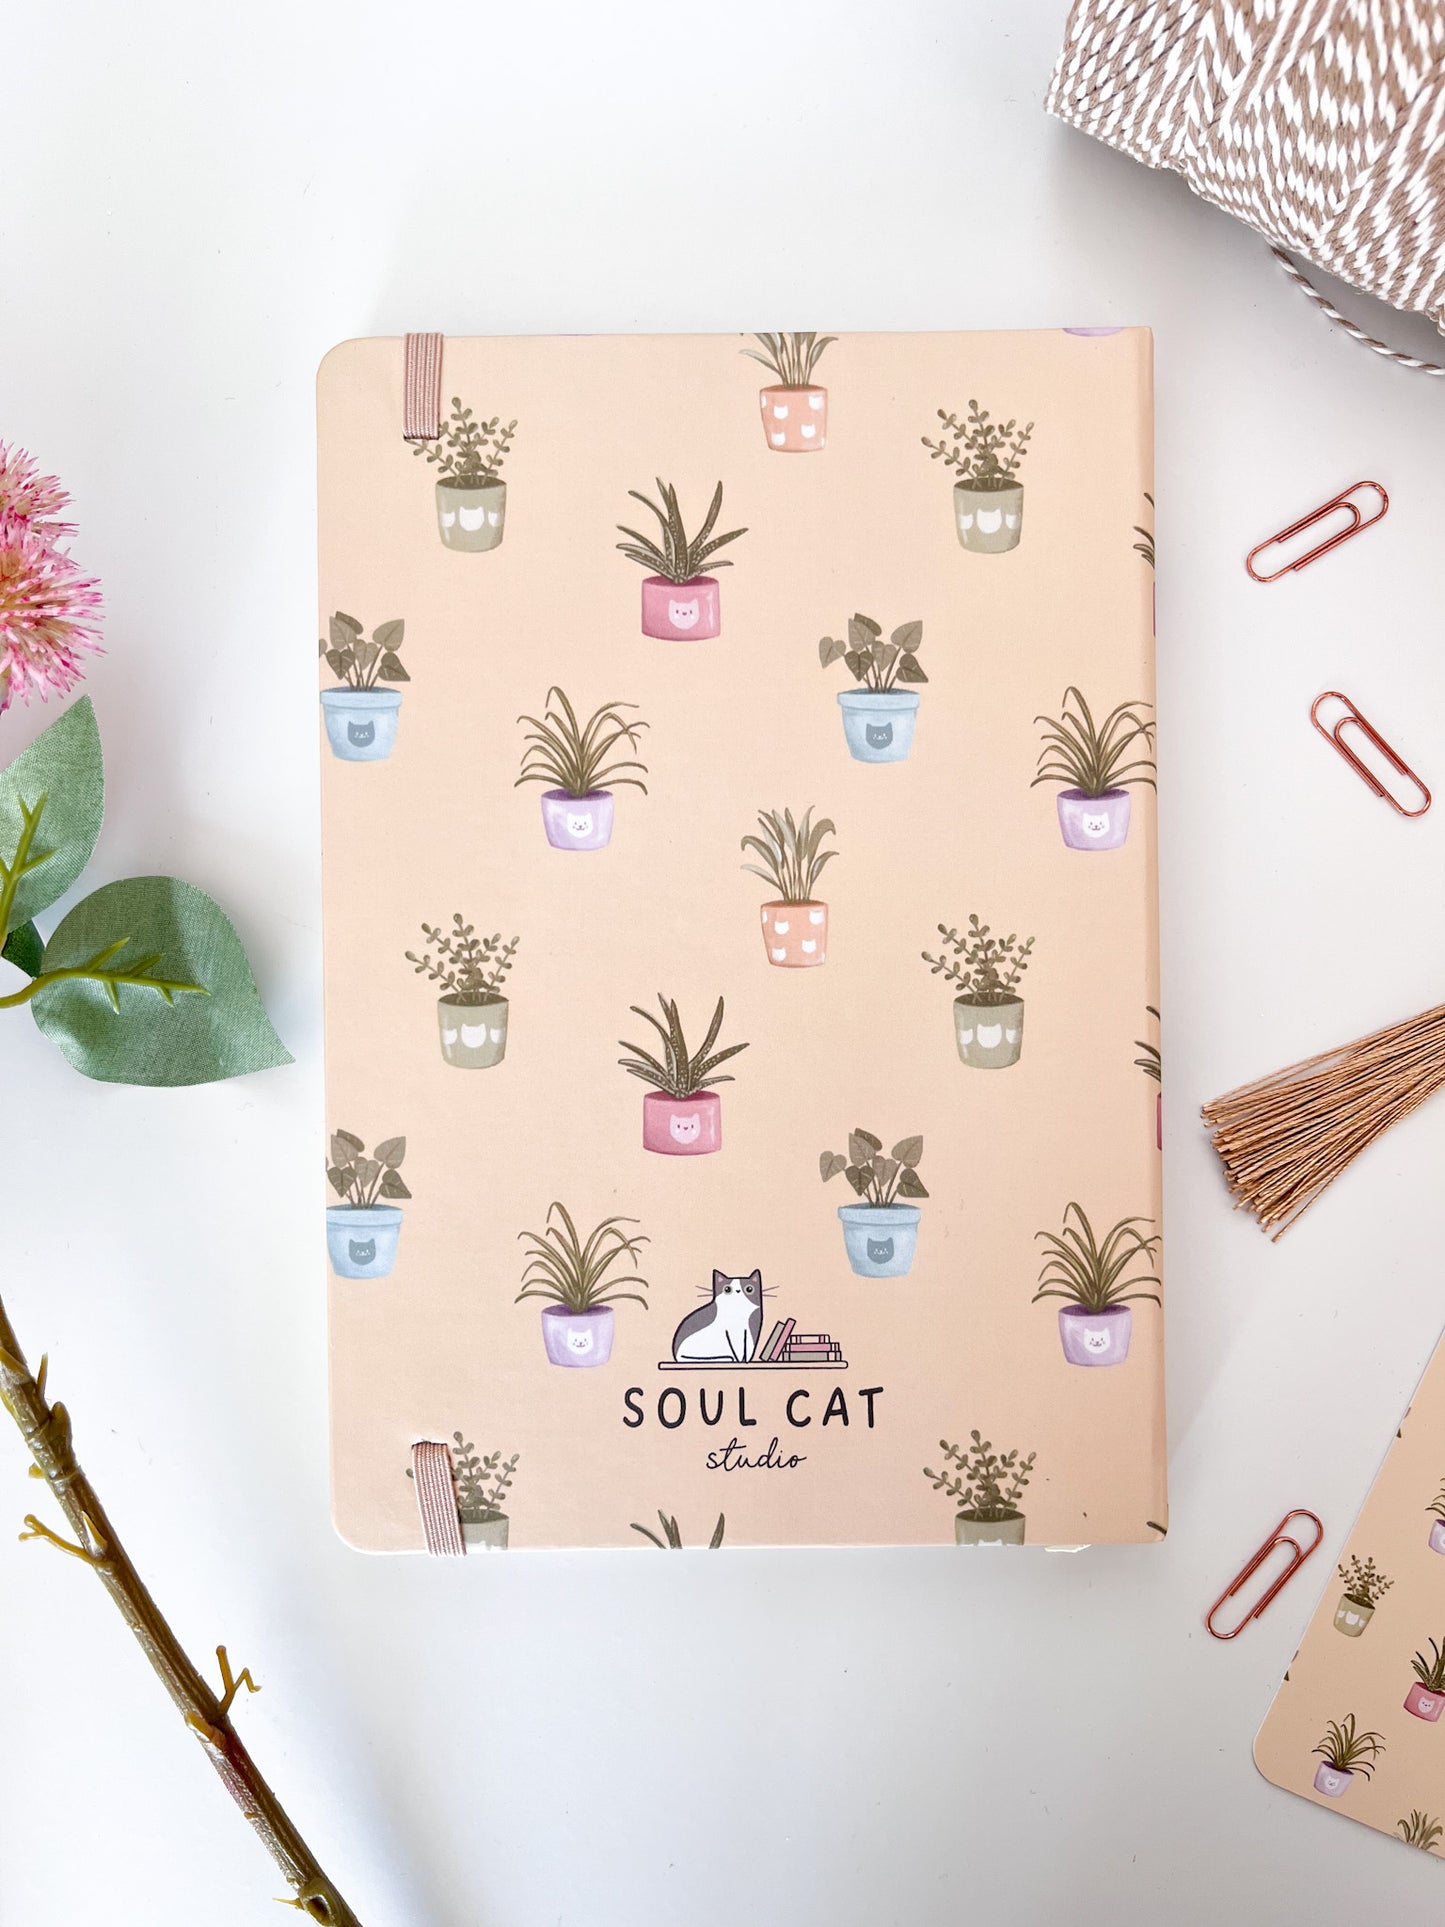 Houseplant A5 Lined Notebook